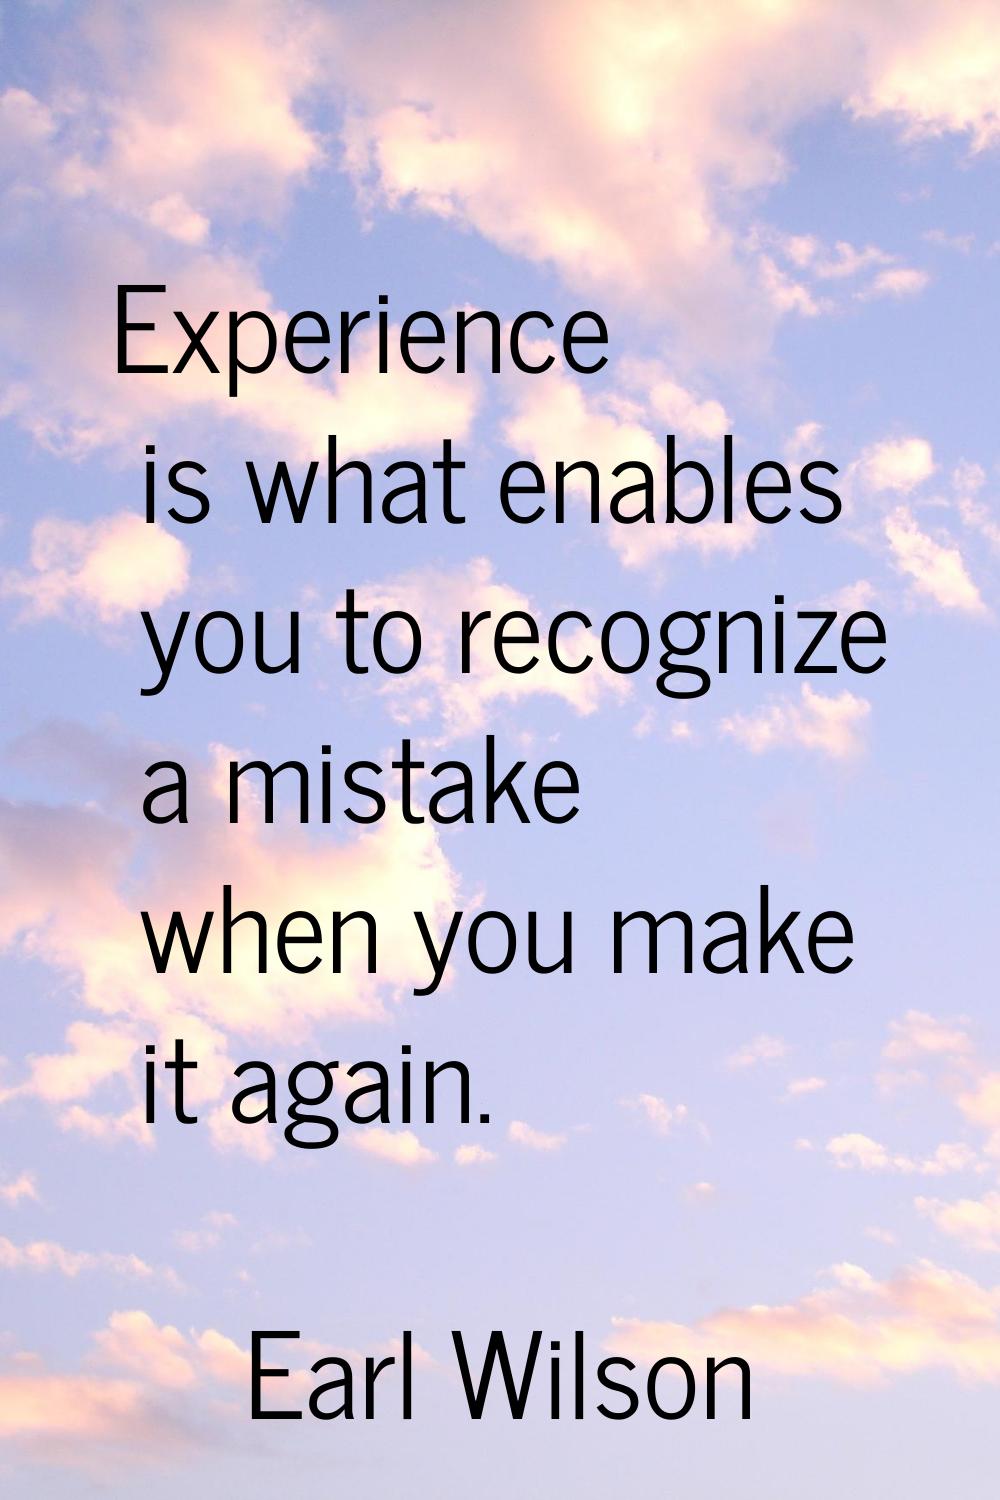 Experience is what enables you to recognize a mistake when you make it again.